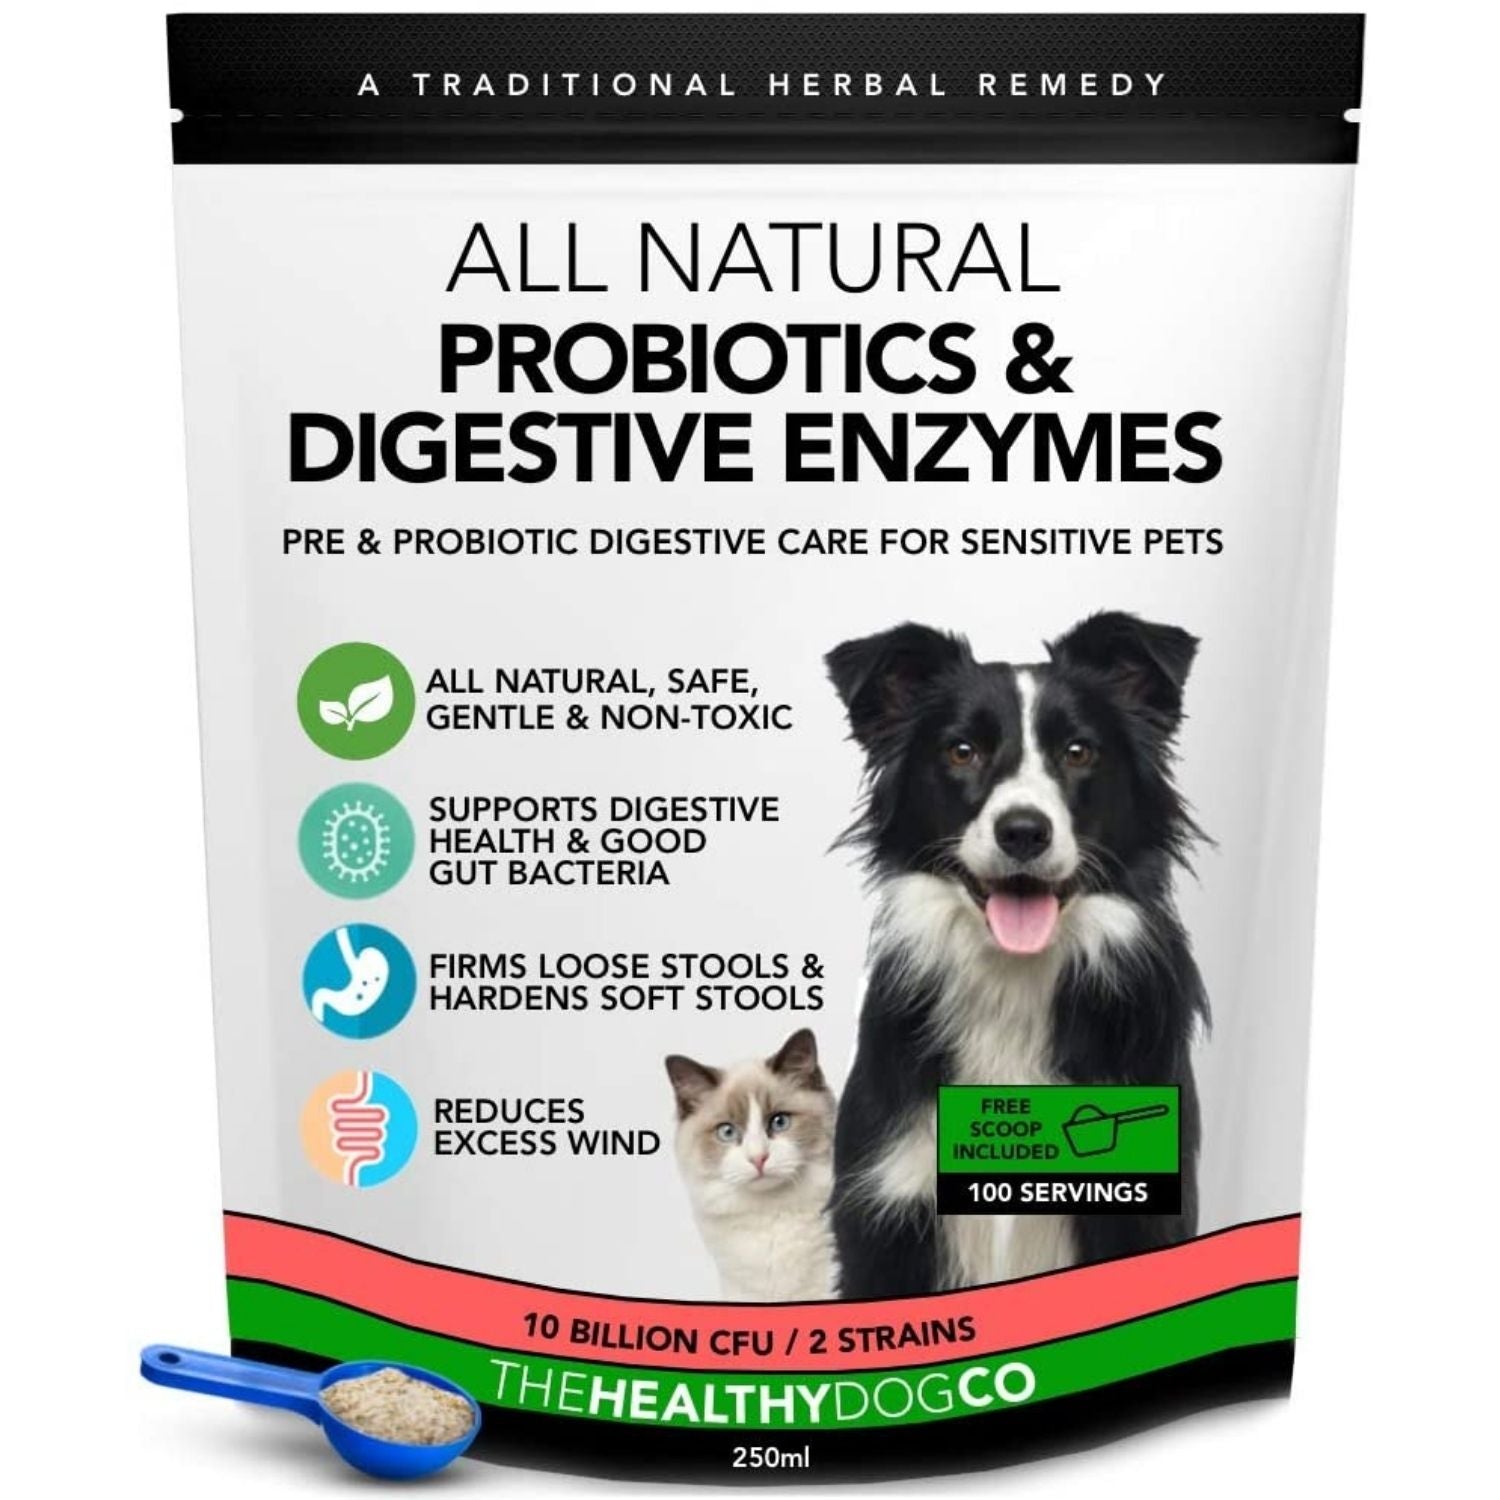 All-Natural Probiotics Digestive Enzymes for Dogs Cats - The Healthy Dog Co